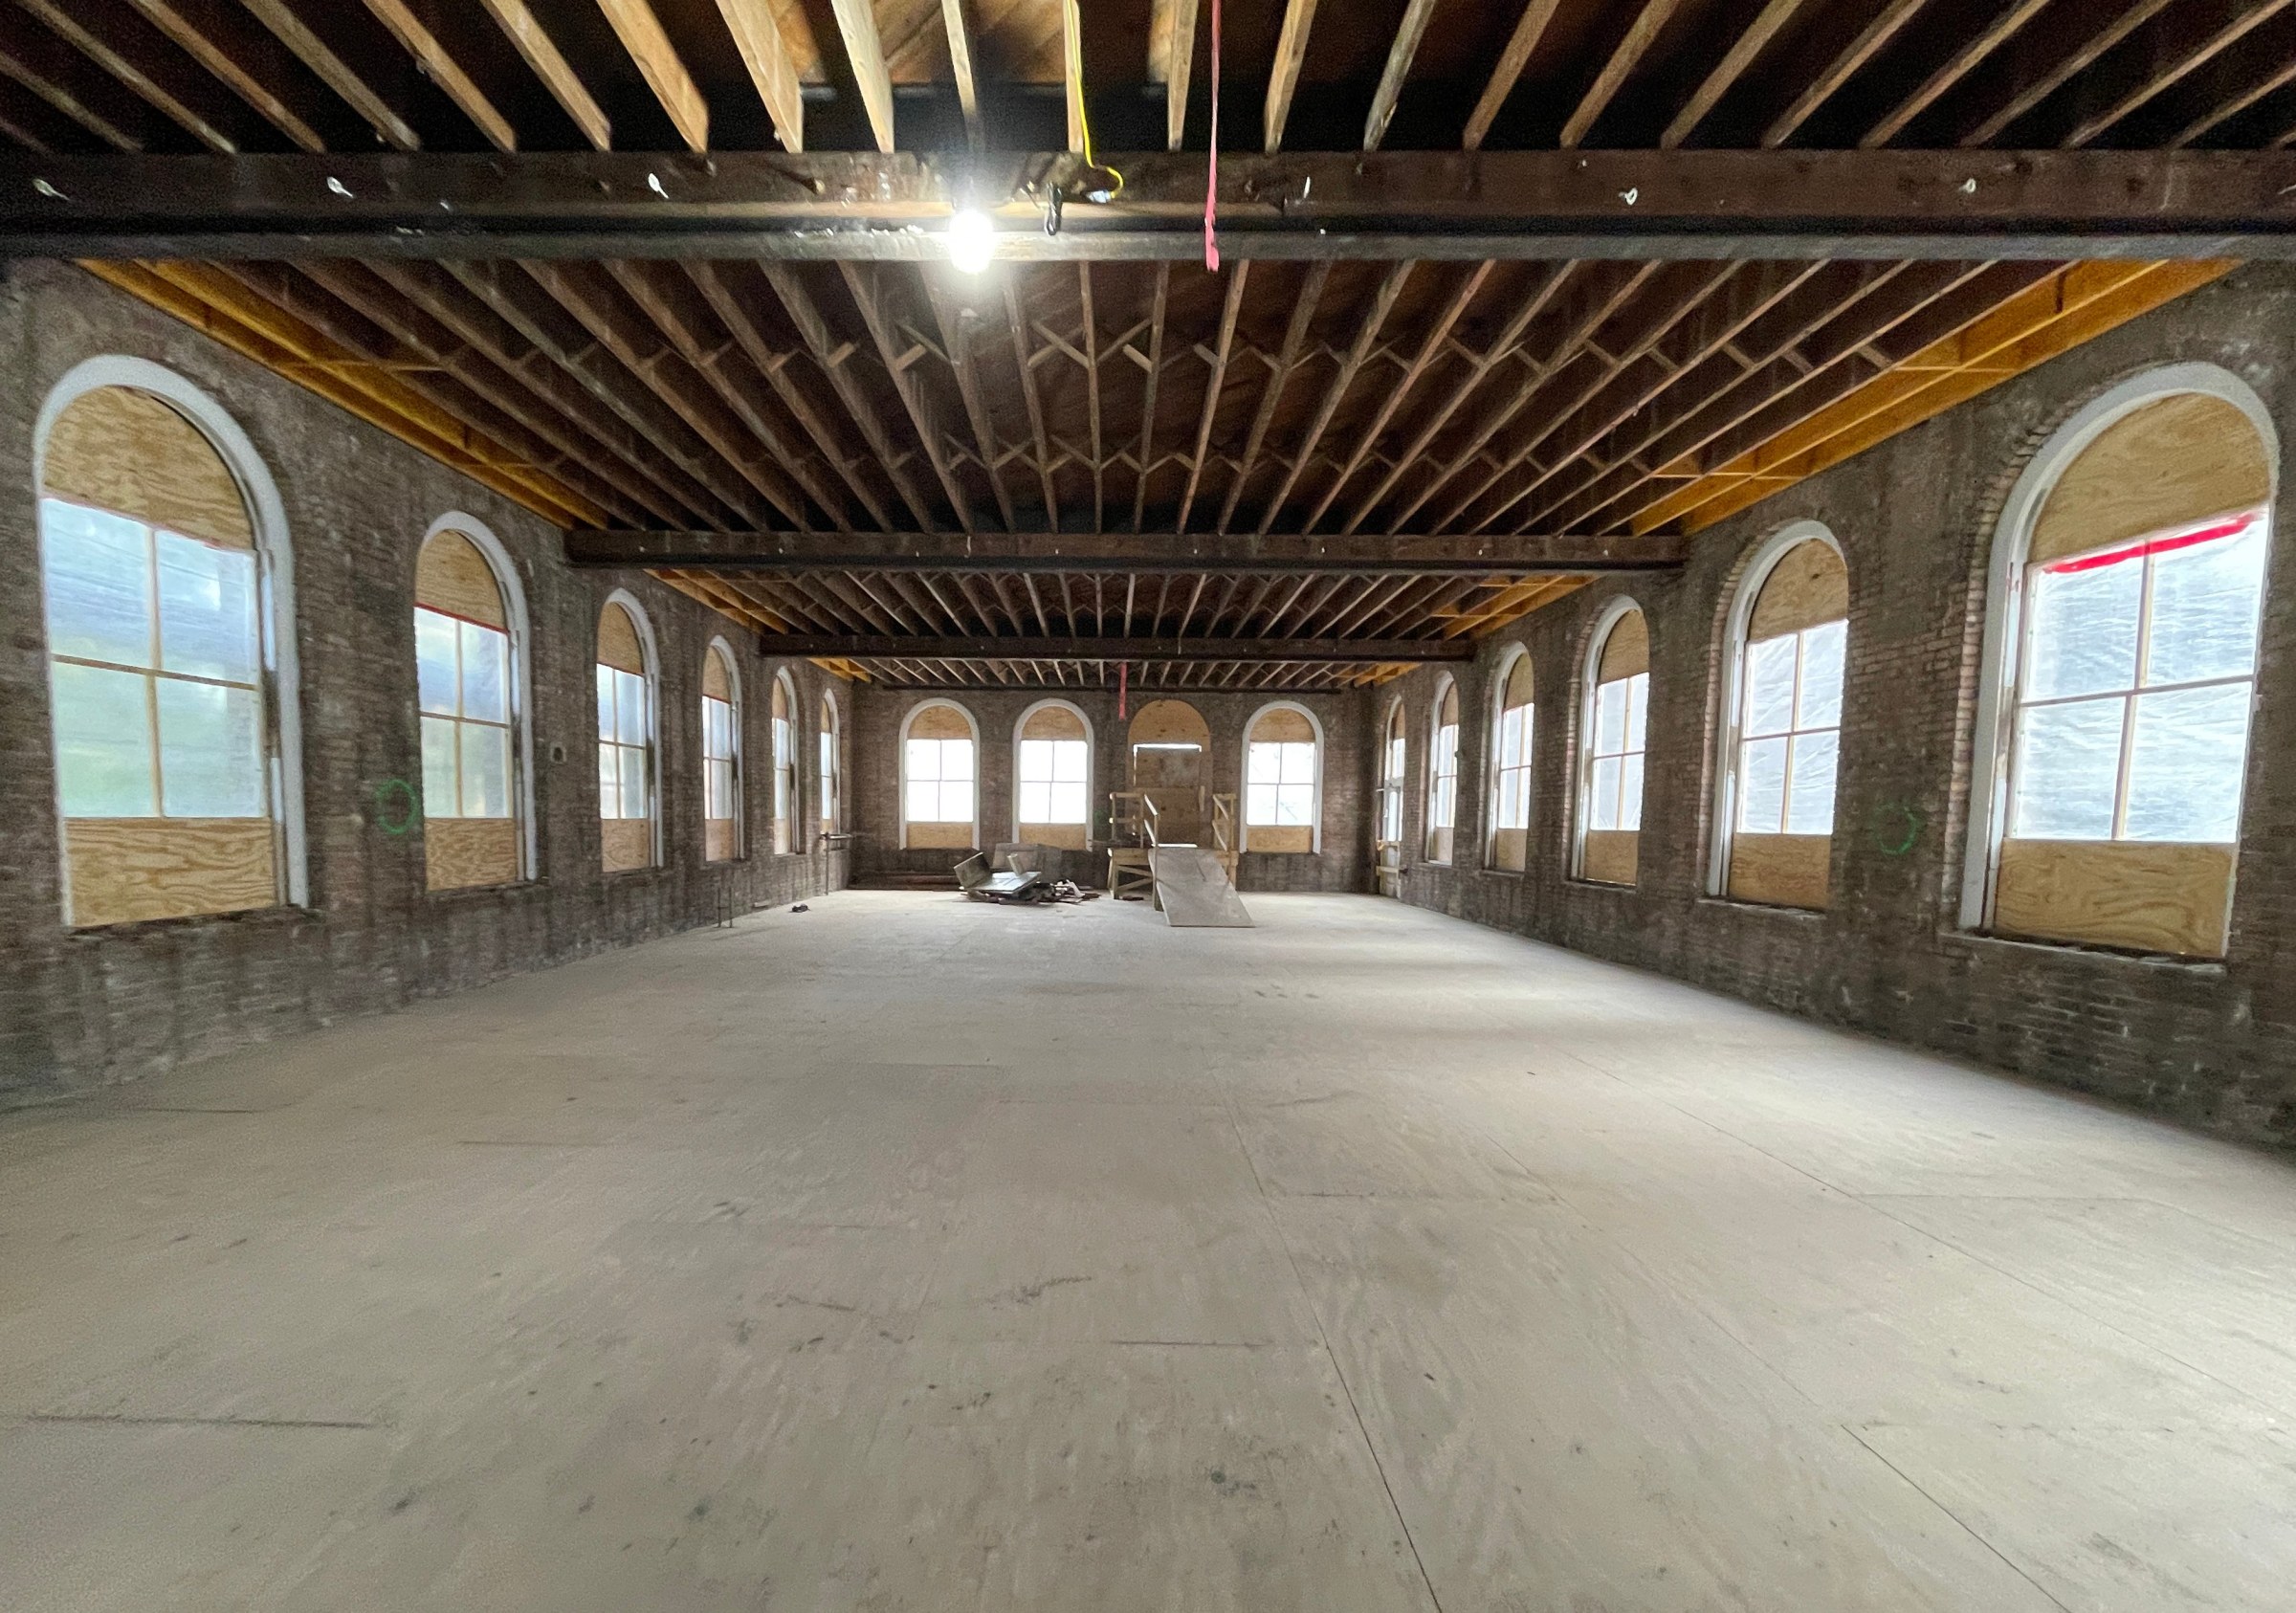 Interior of large room undergoing historic renovation with new wood floors and exposed ceiling beams high above.